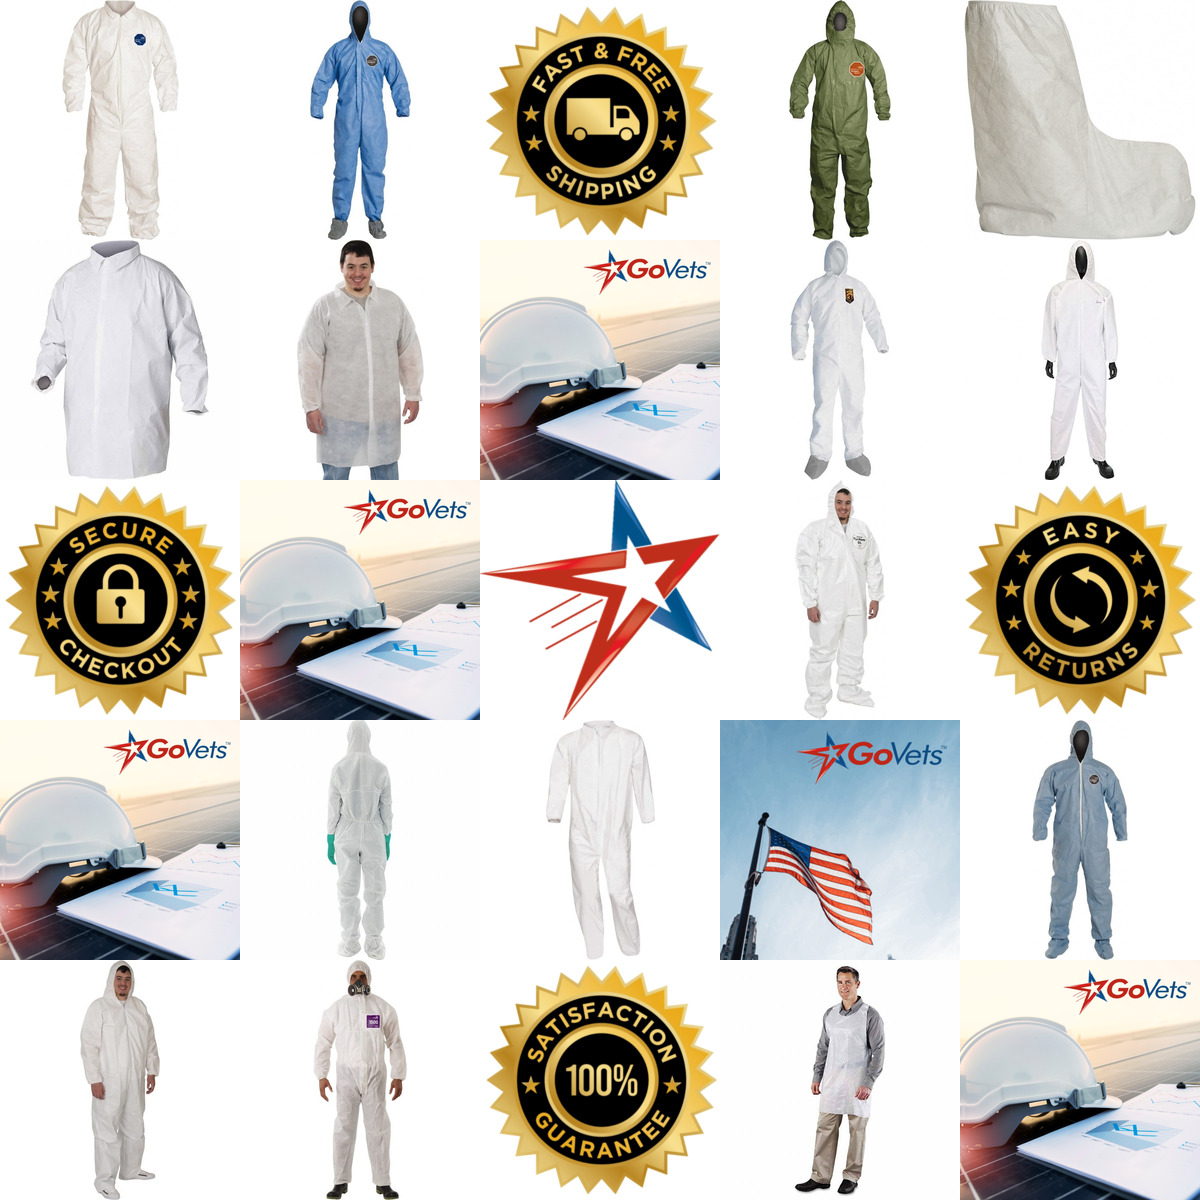 A selection of Disposable Clothing products on GoVets